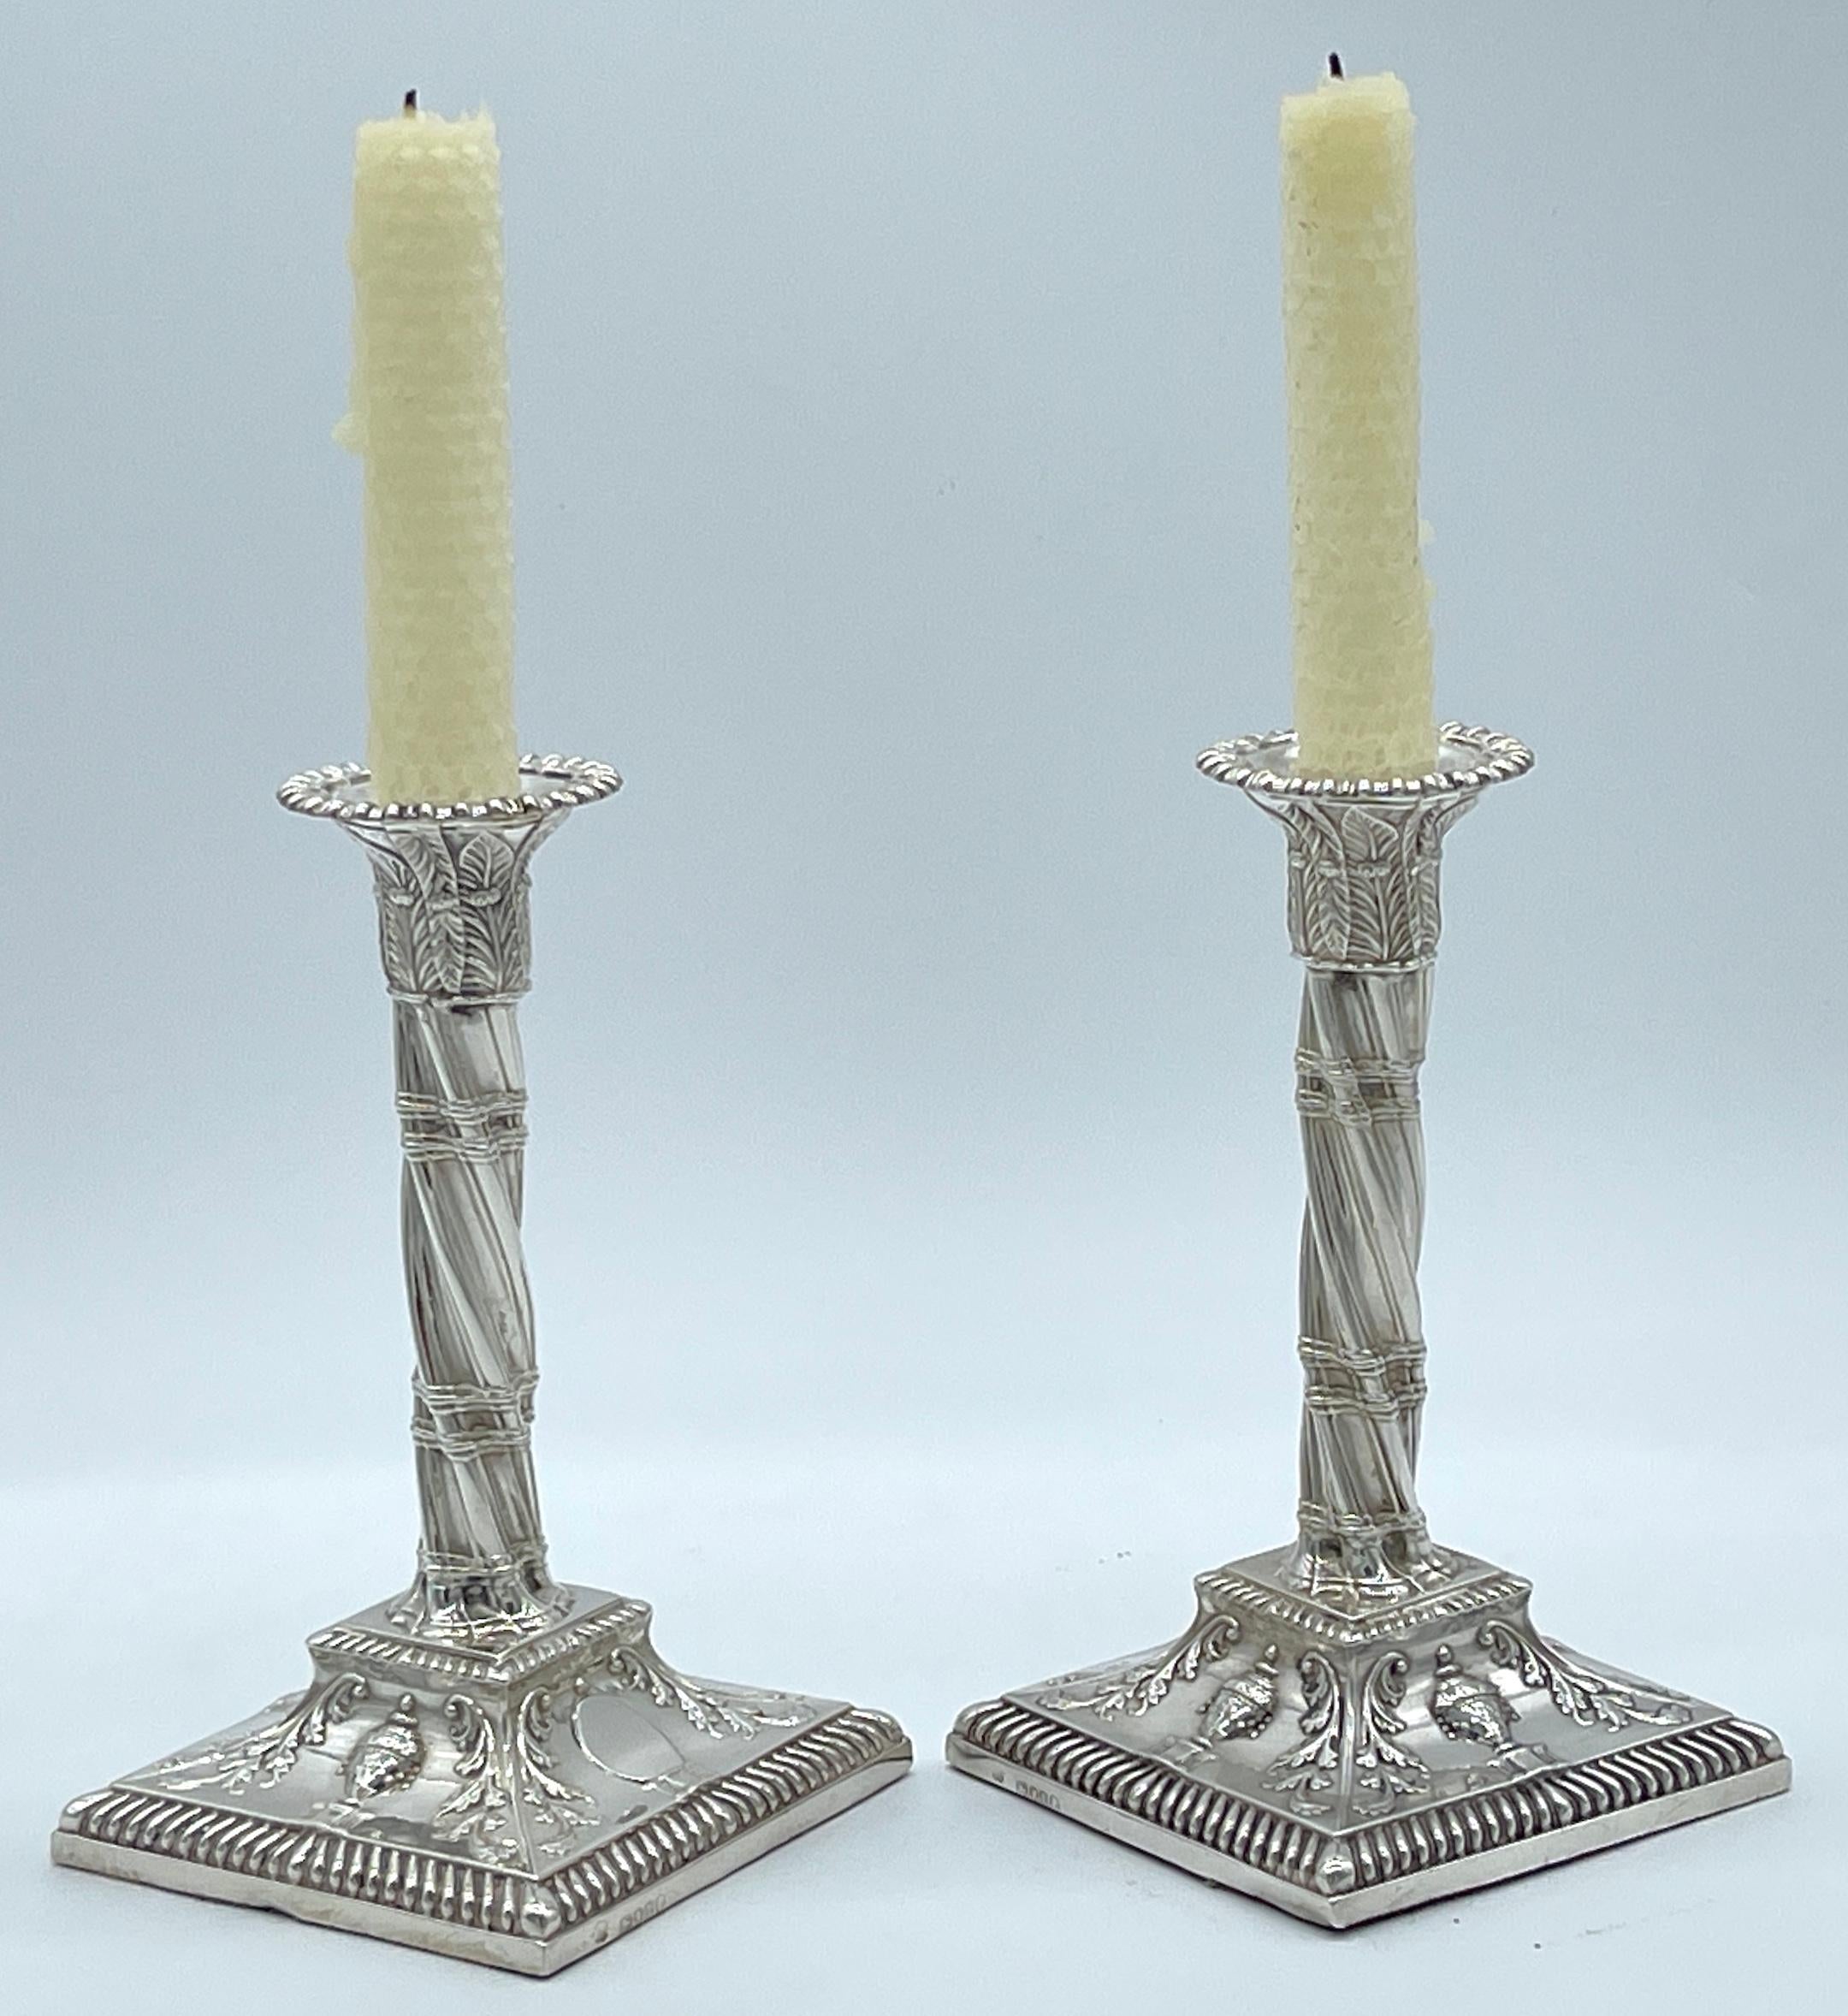 Pair of Exquisite English Victorian Sterling Neoclassical Column Candlesticks 
London,  1884-1885, Hallmarks for John Aldwinckle & Thomas Slater

A fine pair of English Victorian sterling silver neoclassical column candlesticks, crafted by John